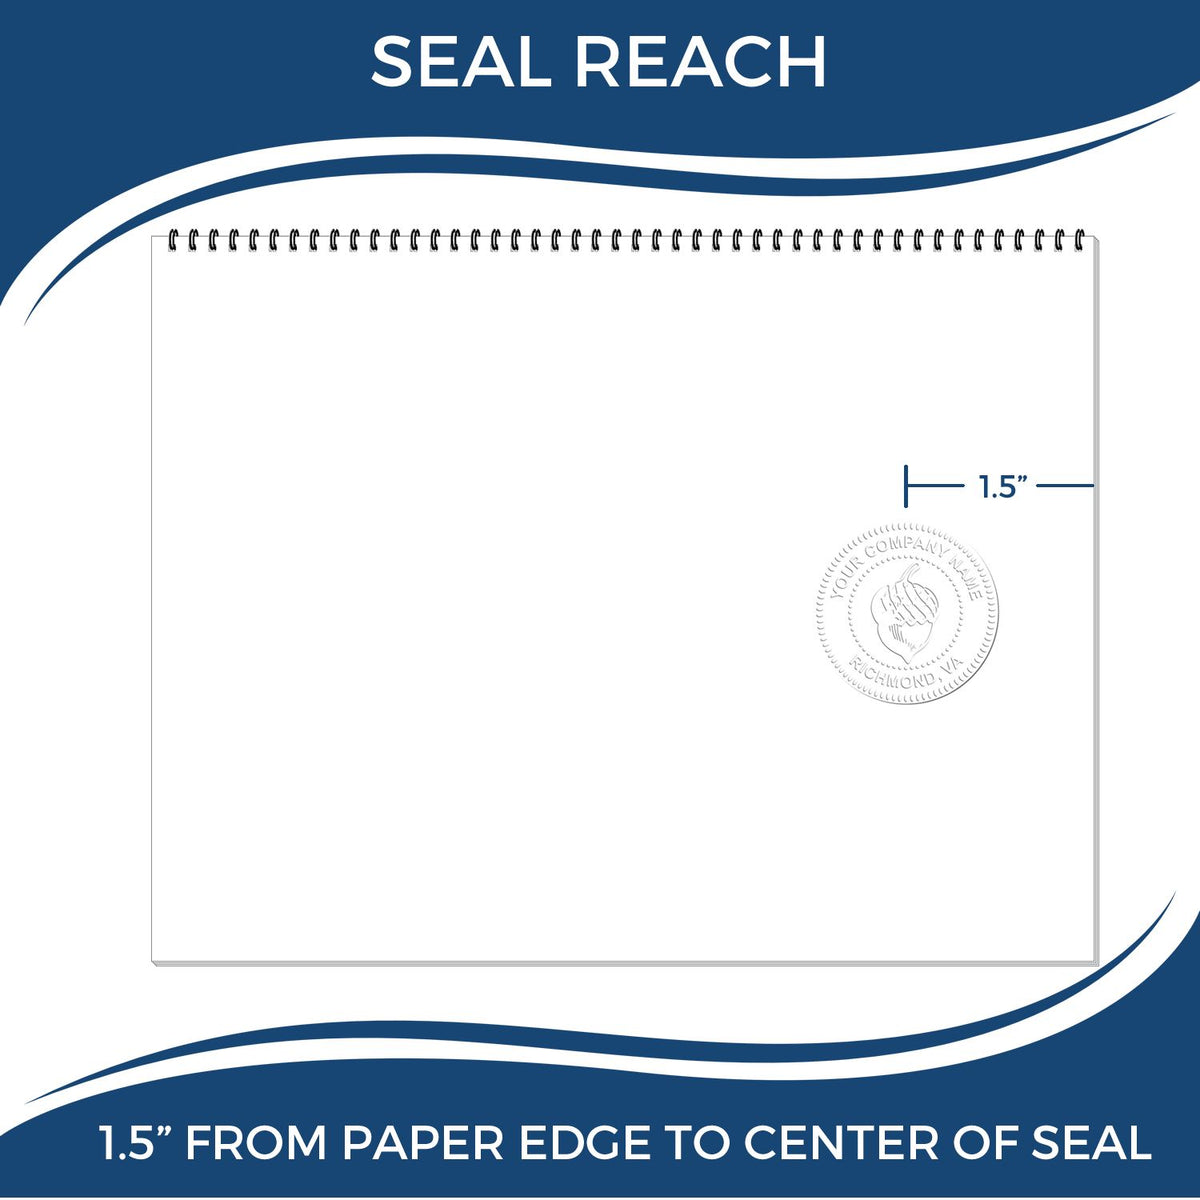 An infographic showing the seal reach which is represented by a ruler and a miniature seal image of the Hybrid Missouri Engineer Seal